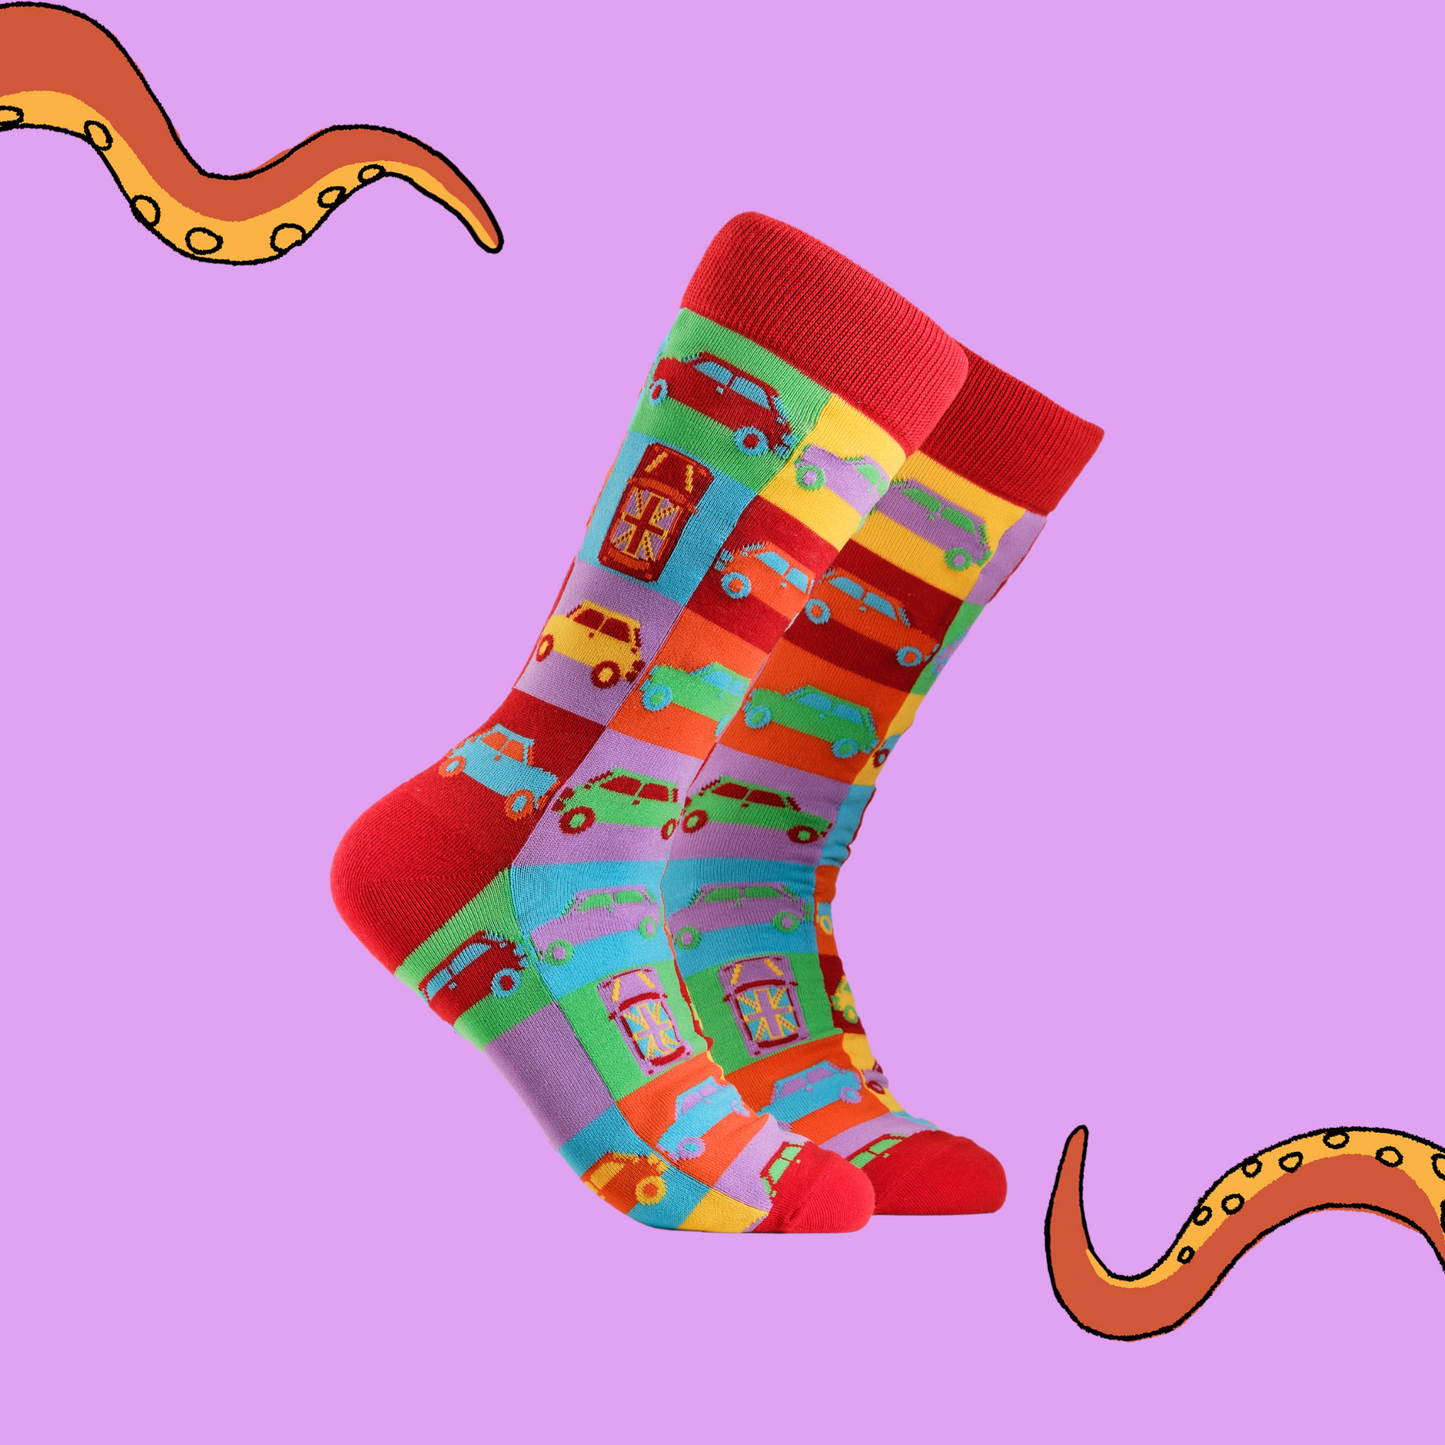 A pair of socks depicting the iconic Mini Cooper. Multicoloured legs, red cuff, heel and toe.